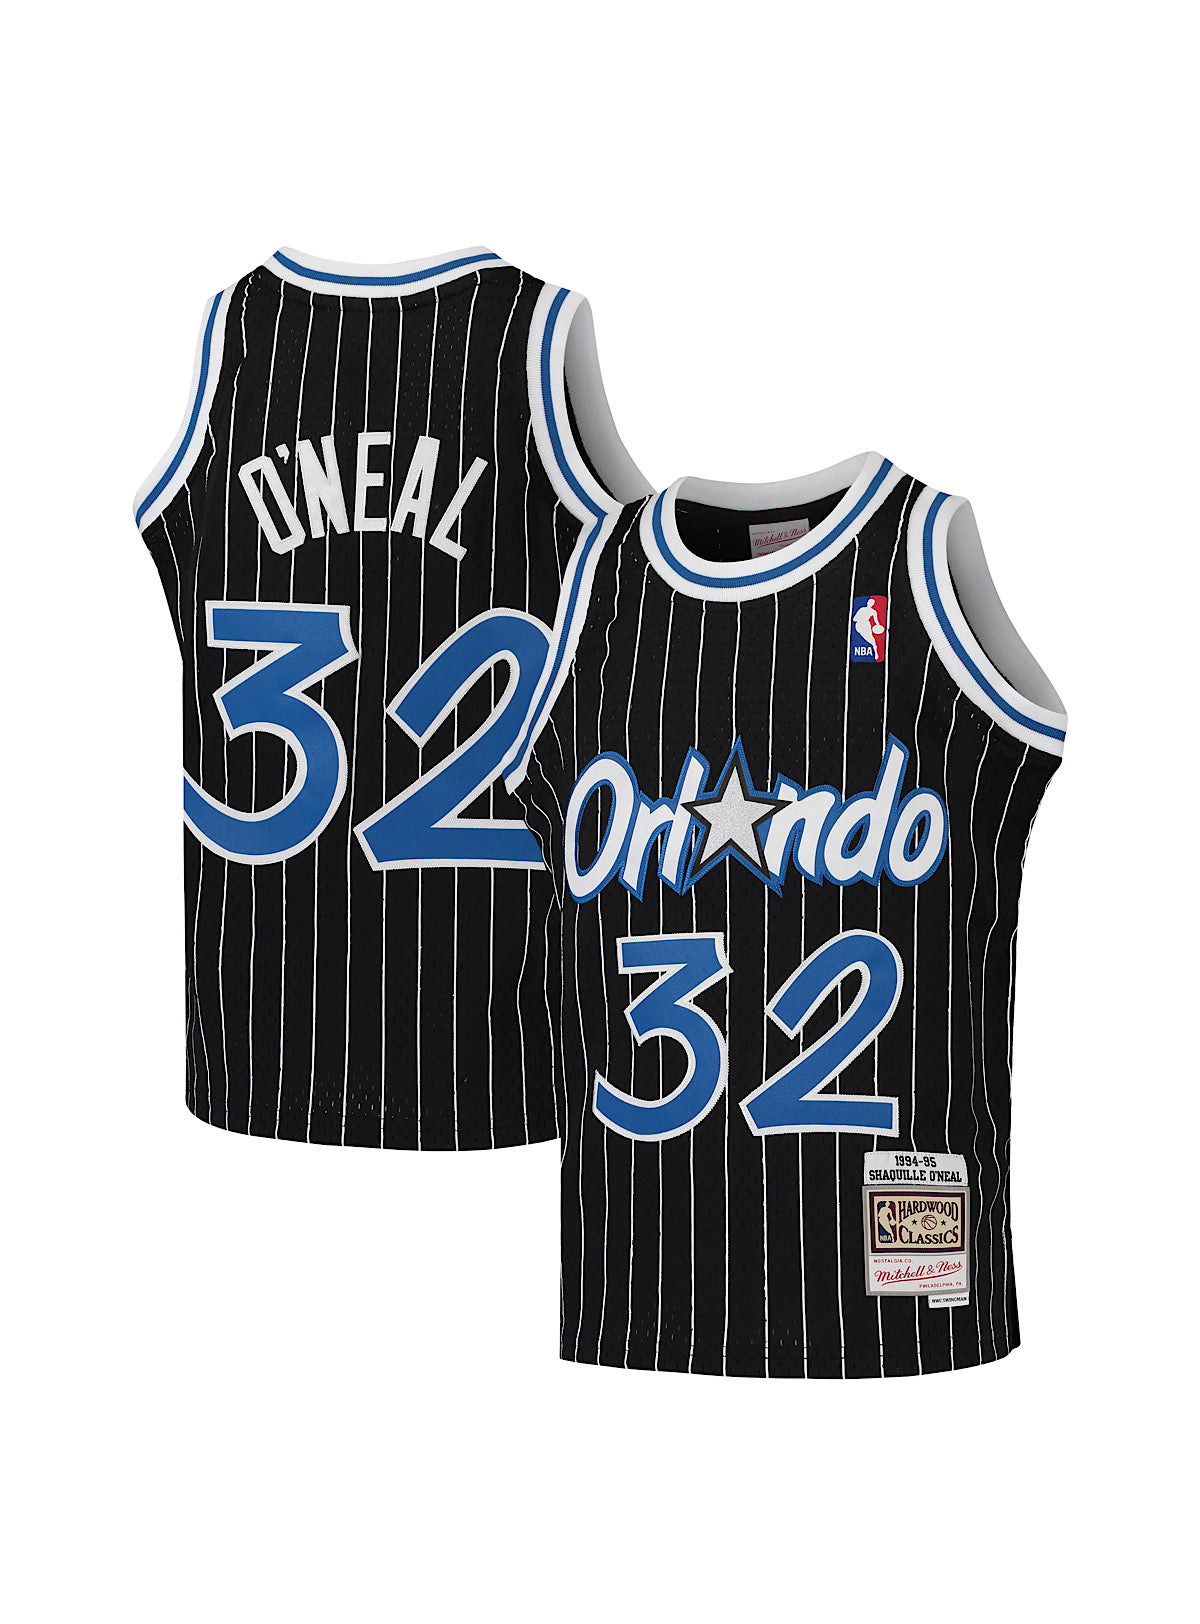 2010-11 Orlando Magic Game Issued Black Practice Jersey 3XL2 DP12832